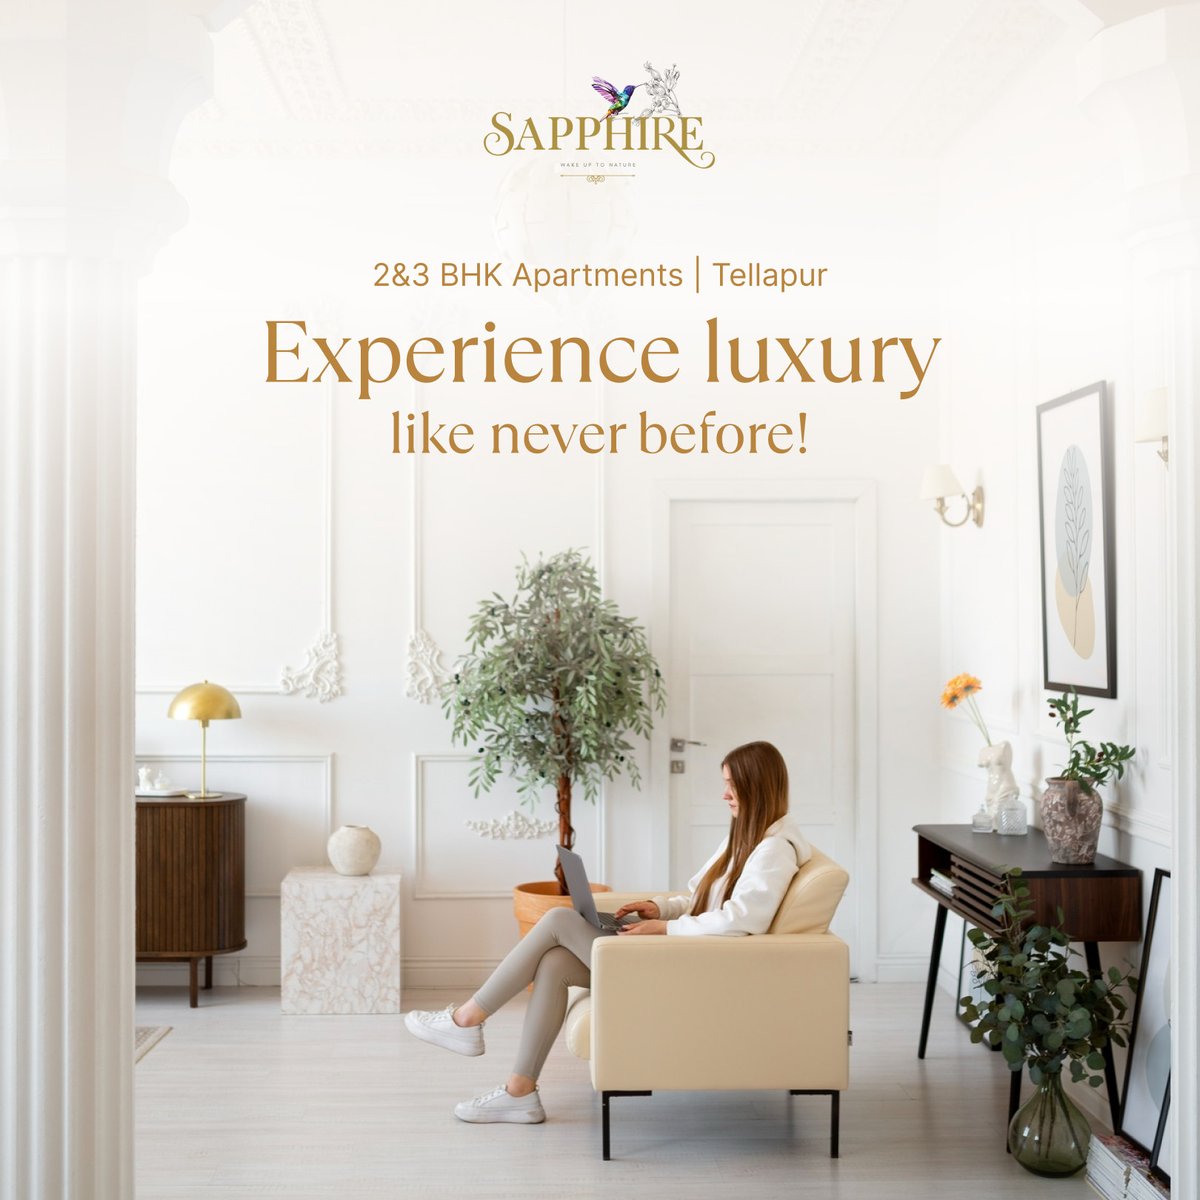 Experience the epitome of refined living at Sapphire, where every moment is a harmonious blend of contemporary comfort and natural beauty!

#Sapphire #PremiumApartments #2&3BHK #Tellapur #Hyderabad #FortuneGreenHomes